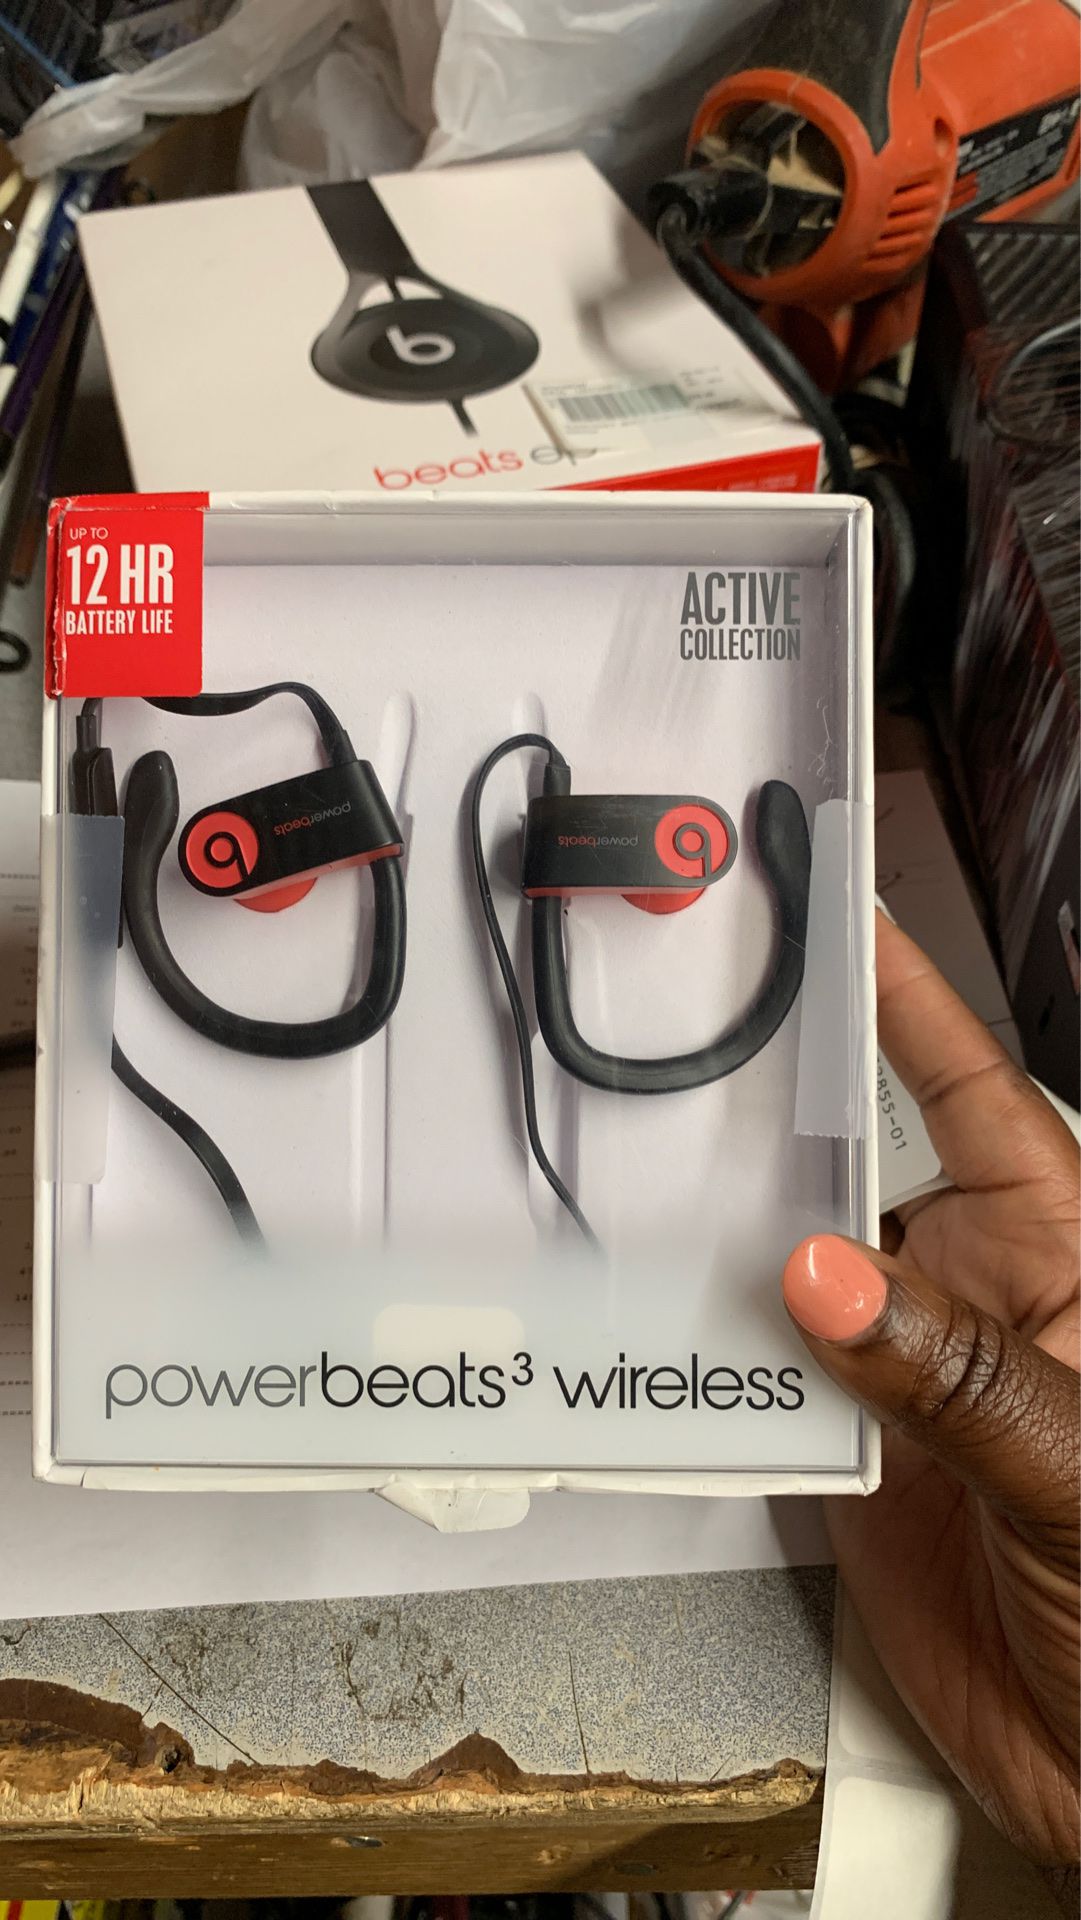 Wireless beats 3 $80 ( layaway for 10.00 down)